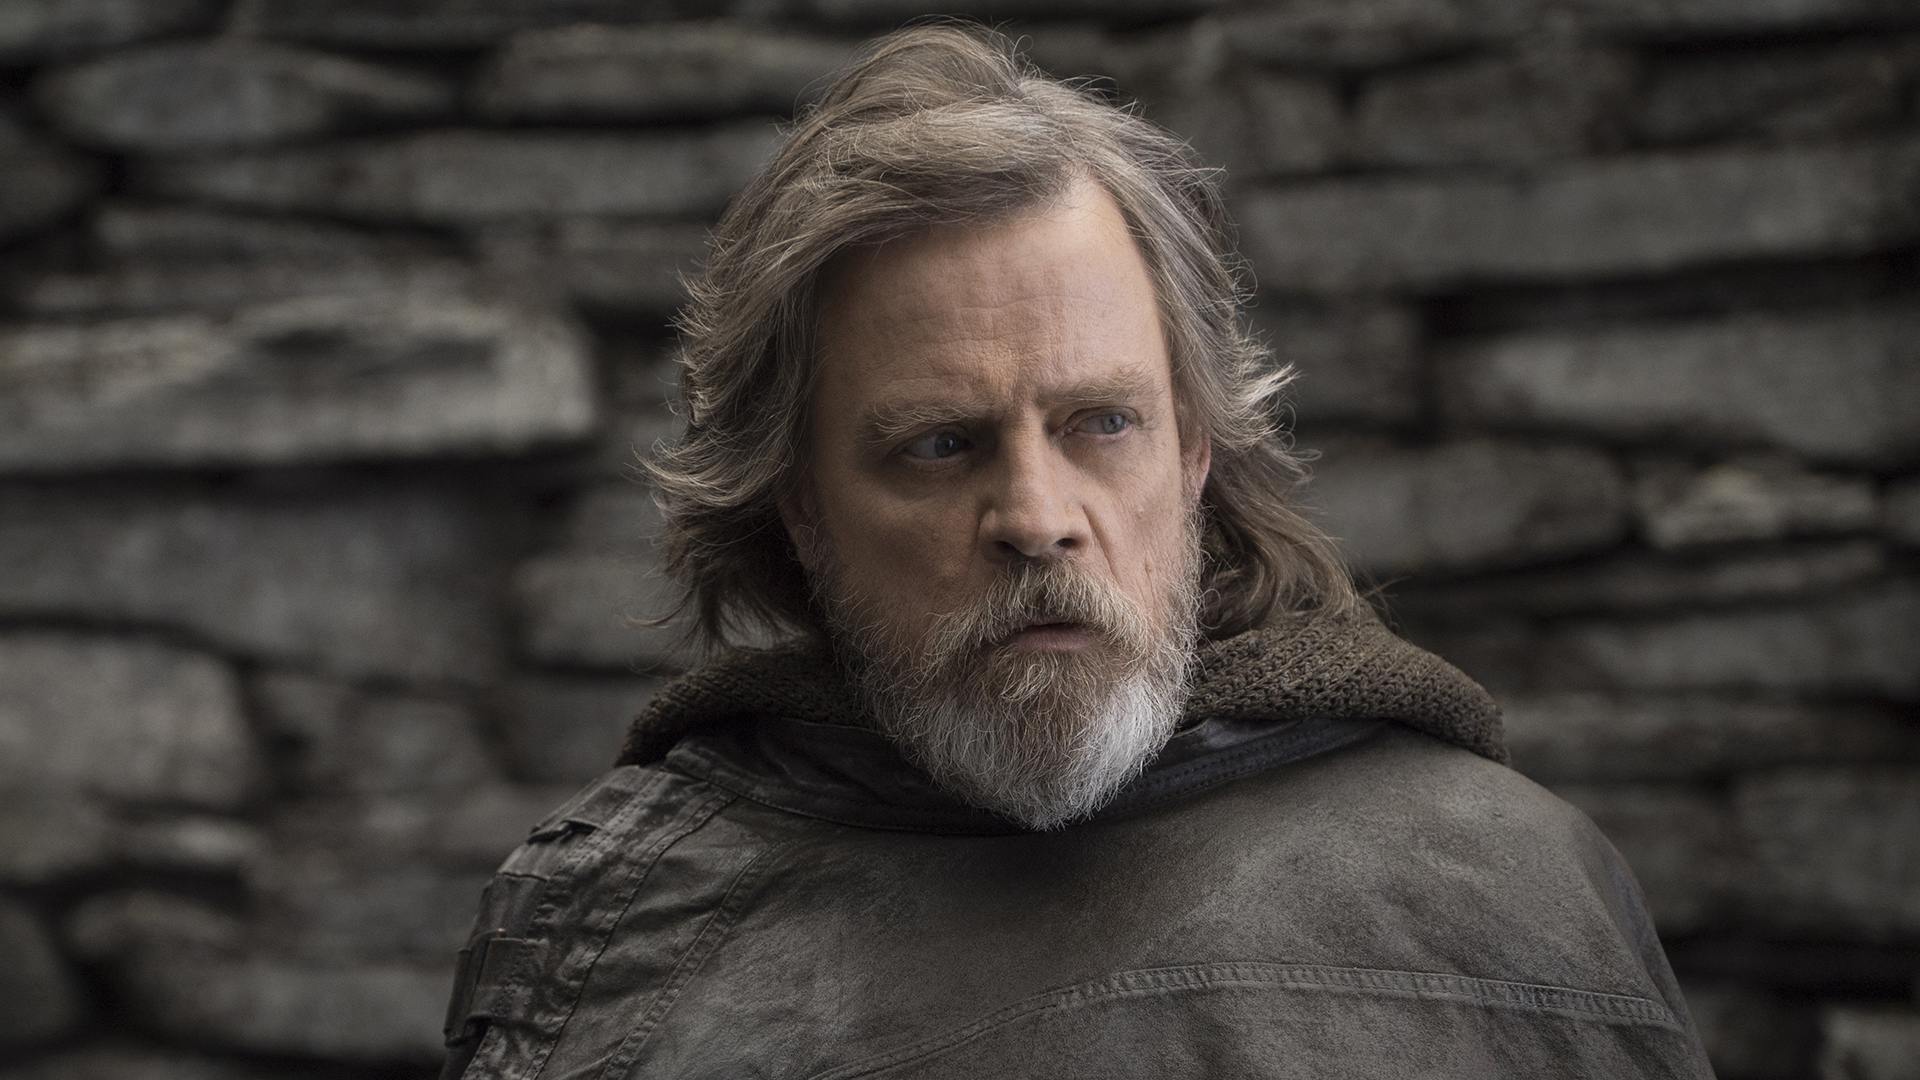 Star Wars The Last Jedi Cast Mark Hamill Net Worth Daisy Ridley Net Worth And More Gobanking